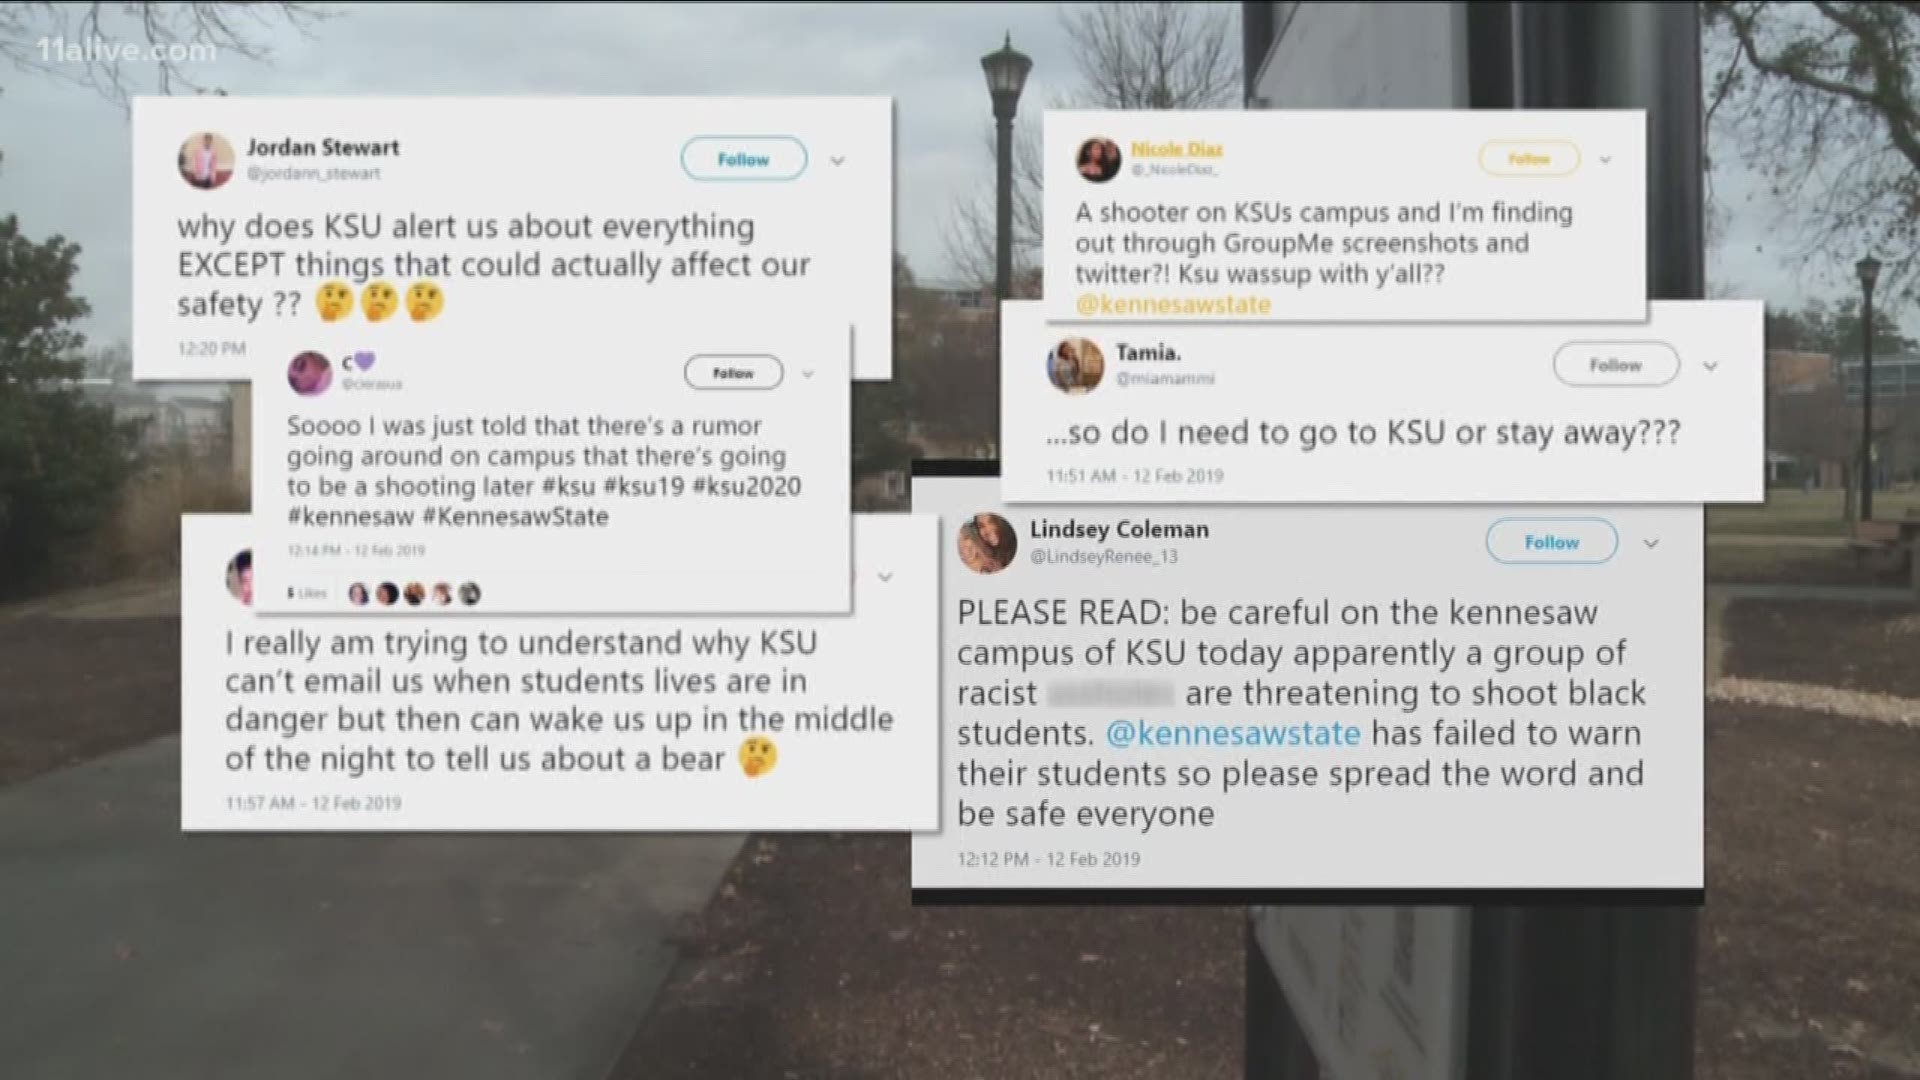 Students at KSU voice their opinions about a similar situation, were social media posts caused frustration and panic. School officials later said there was no threat.